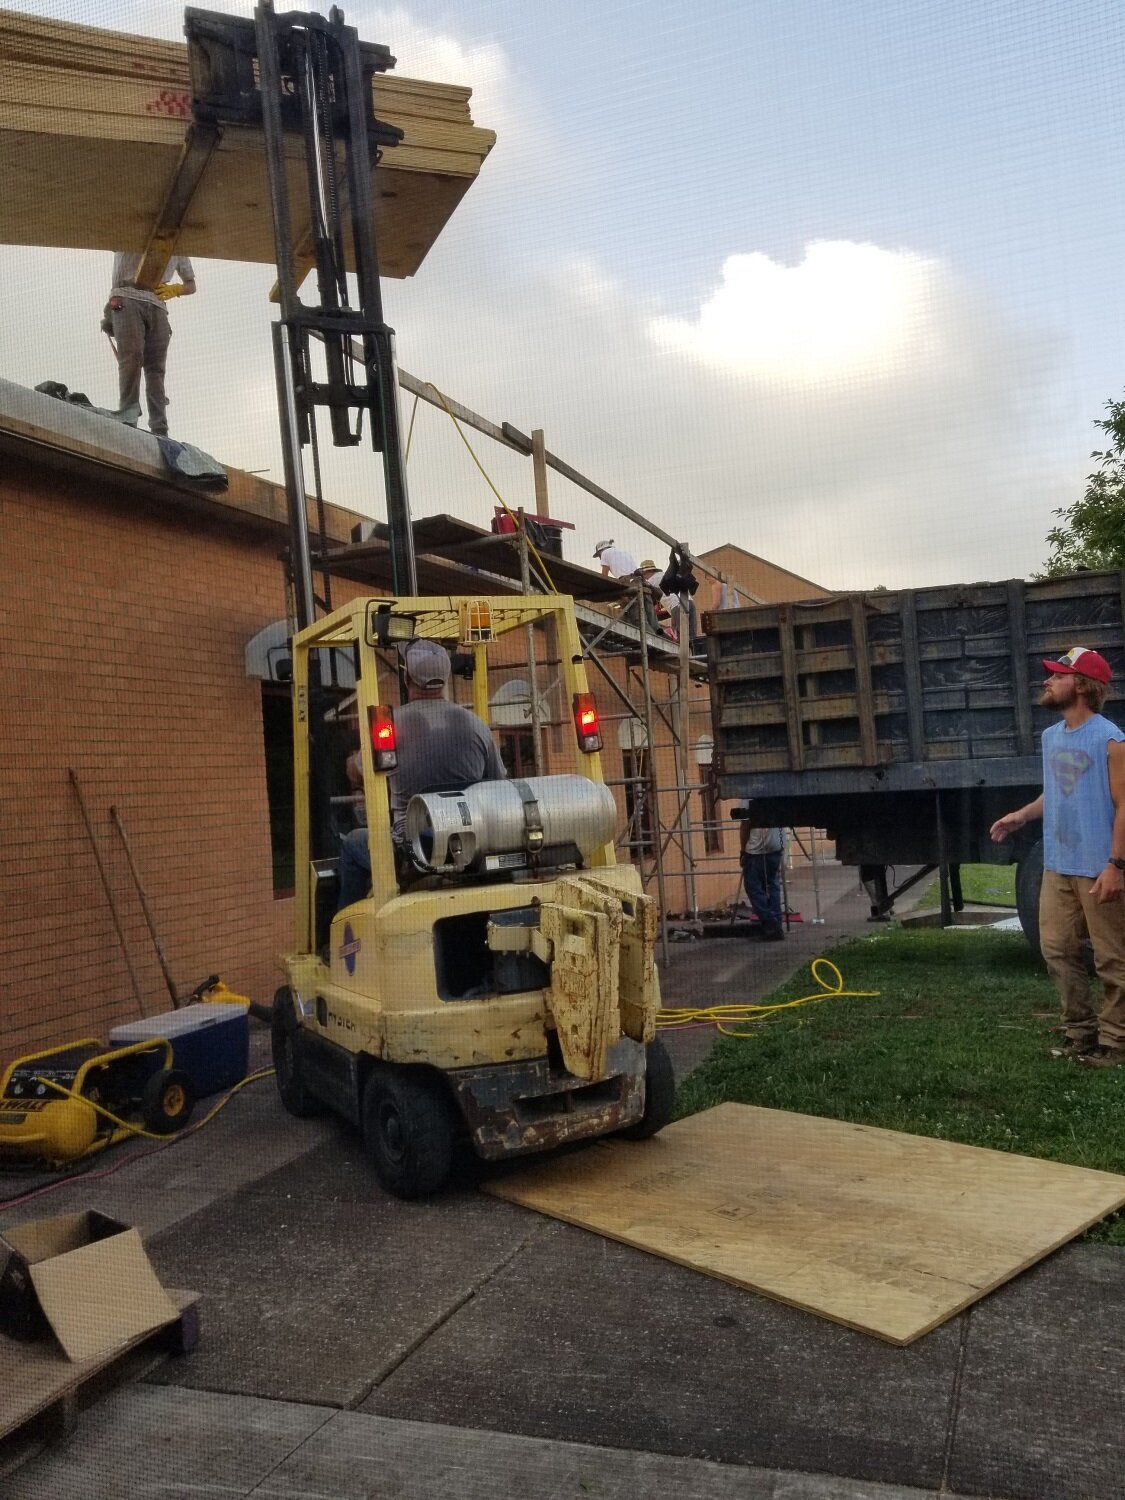  The Helmings crew are certainly handy with a forklift and can be seen whizzing around the property with loads of plywood, tile, and underlayment! 